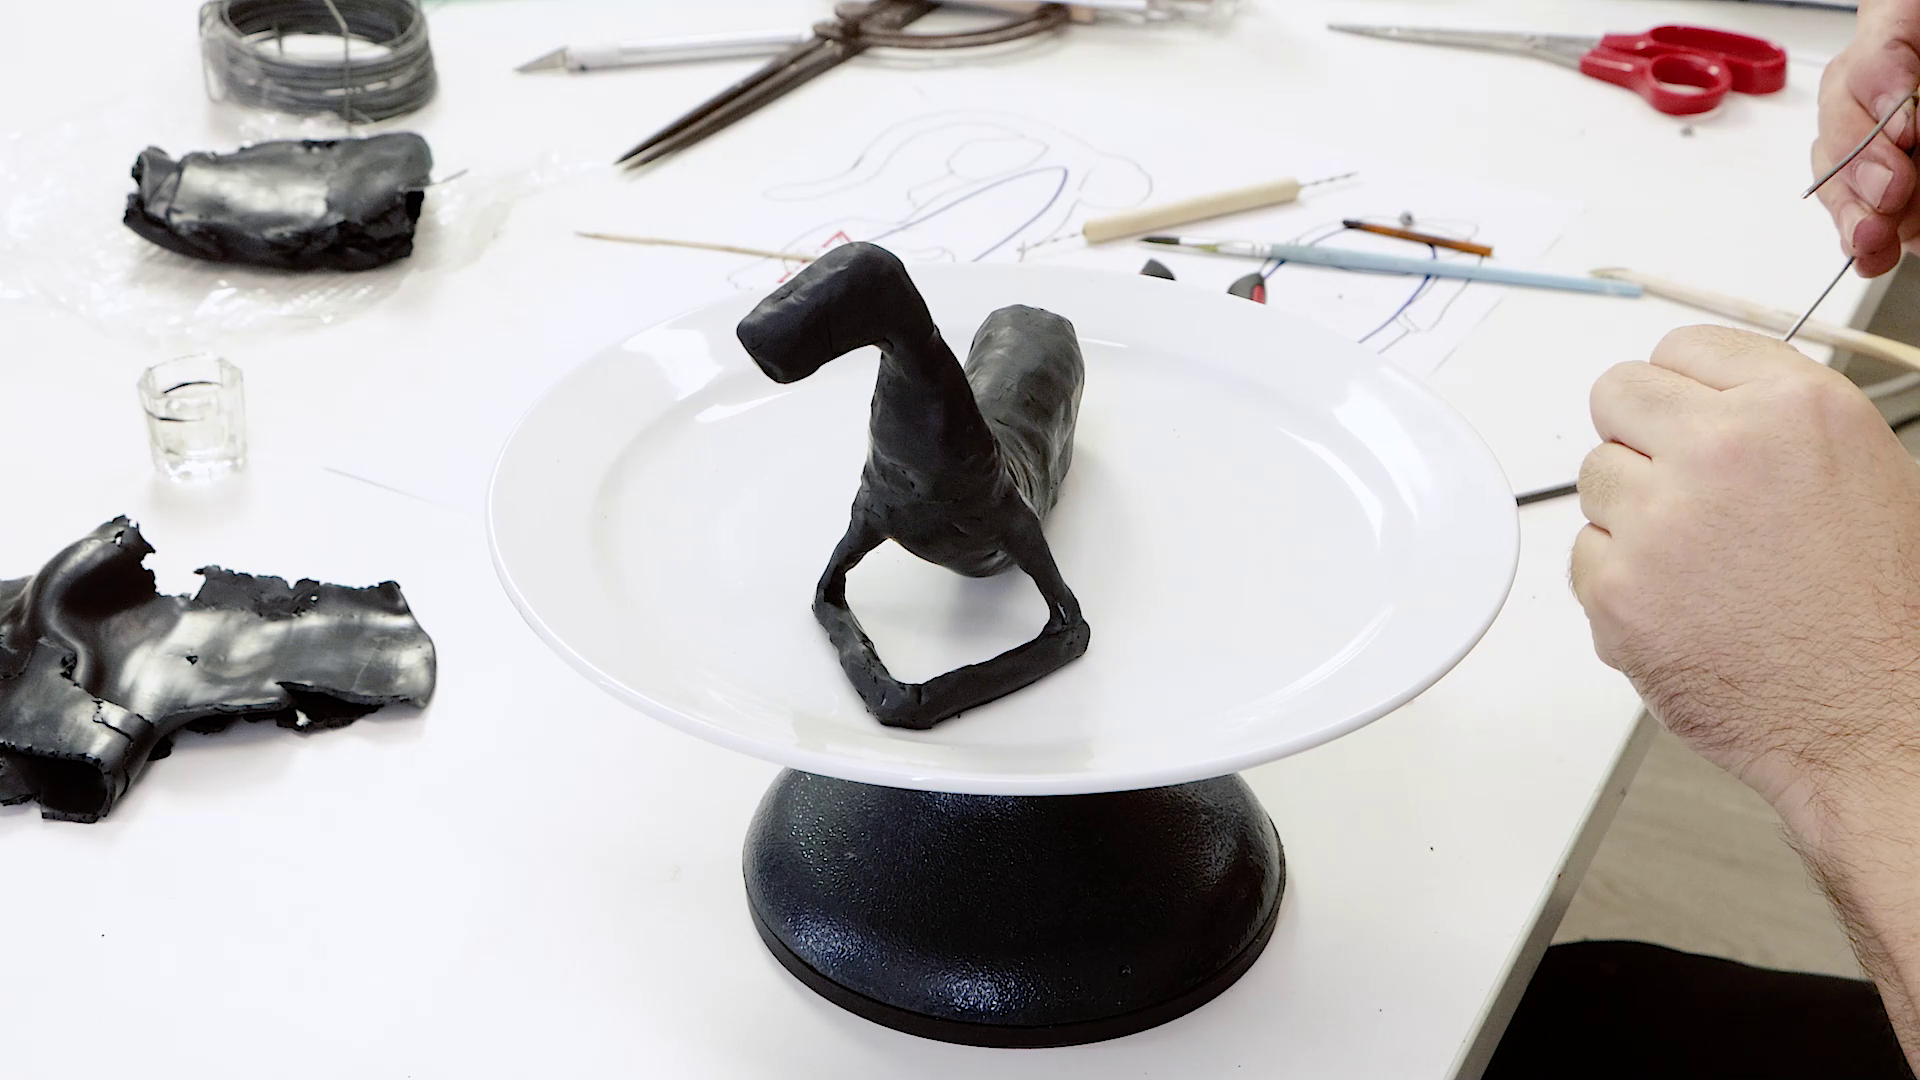 lack polymer clay covering the panther armature